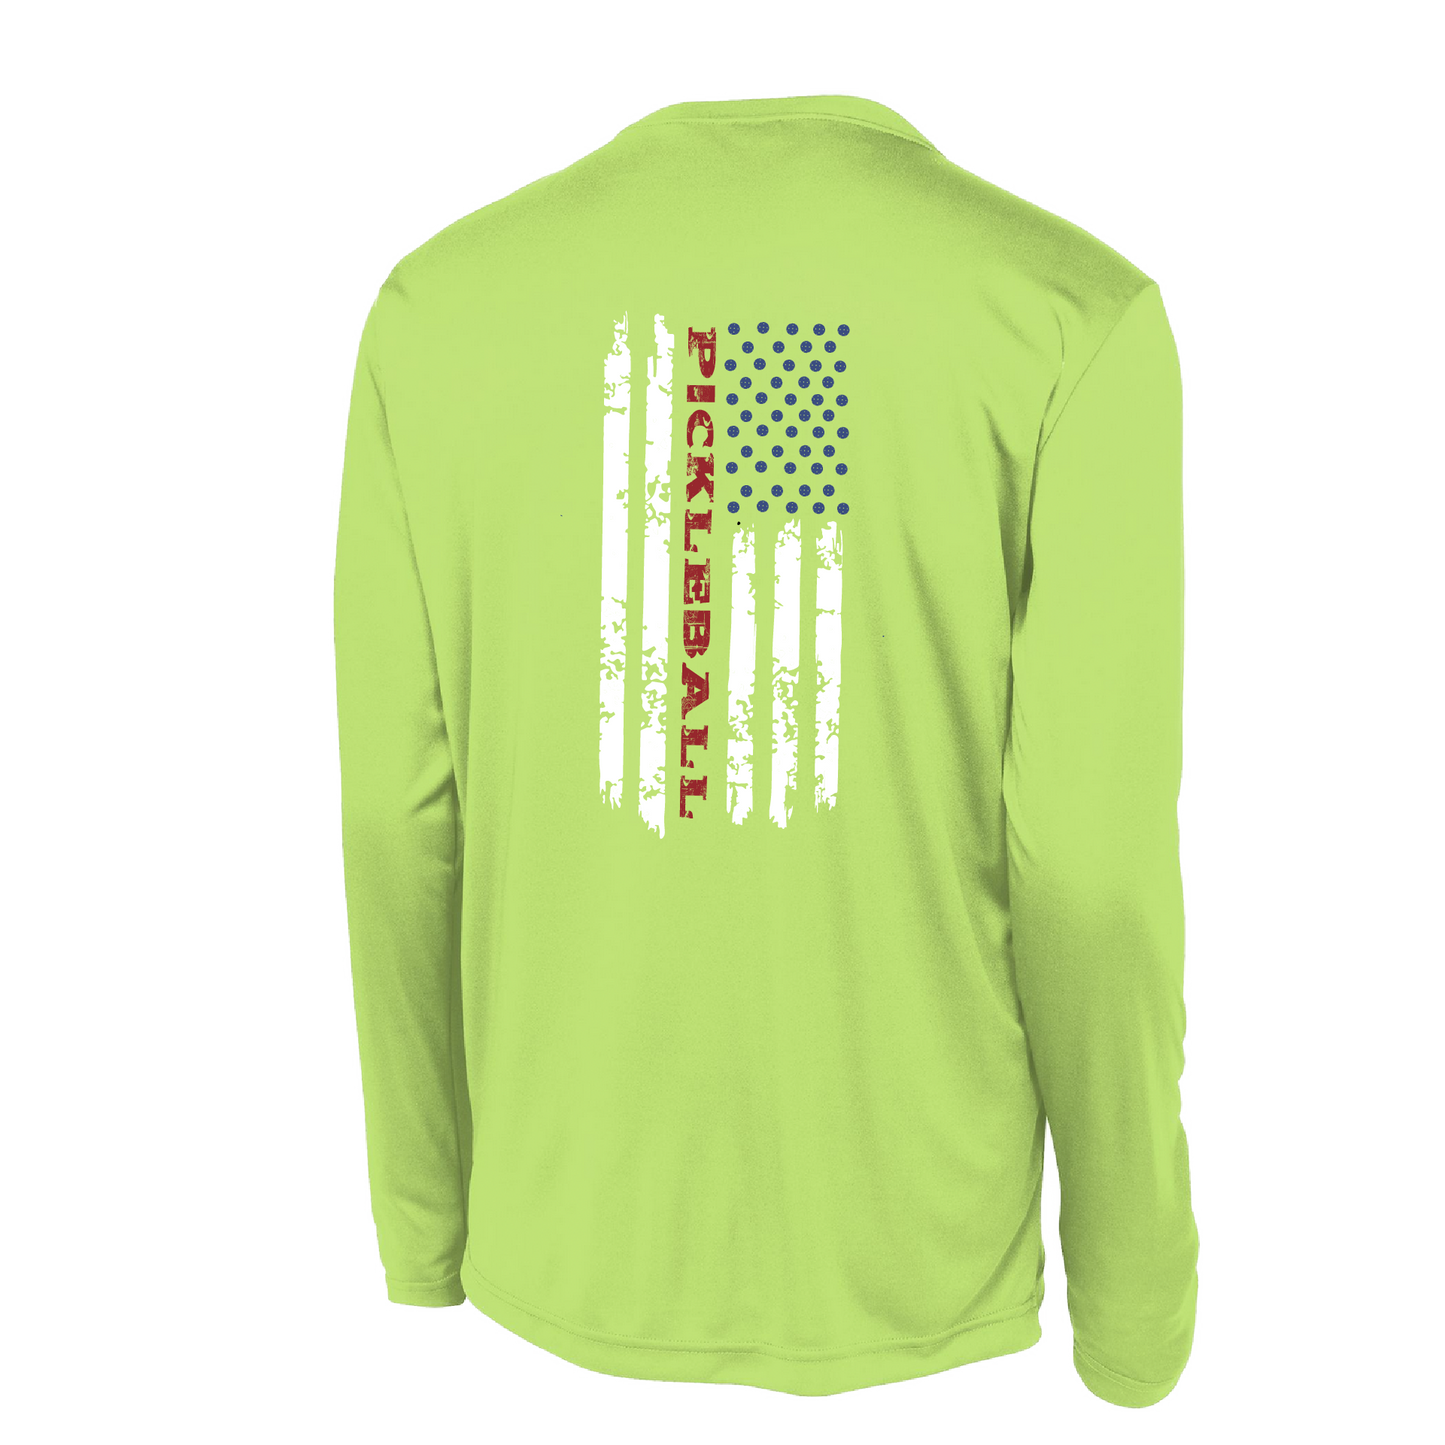 Pickleball Design: Pickleball Vertical Flag on Front or Back Shirt  Men's Styles: Long-Sleeve  Shirts are lightweight, roomy and highly breathable. These moisture-wicking shirts are designed for athletic performance. They feature PosiCharge technology to lock in color and prevent logos from fading. Removable tag and set-in sleeves for comfort.